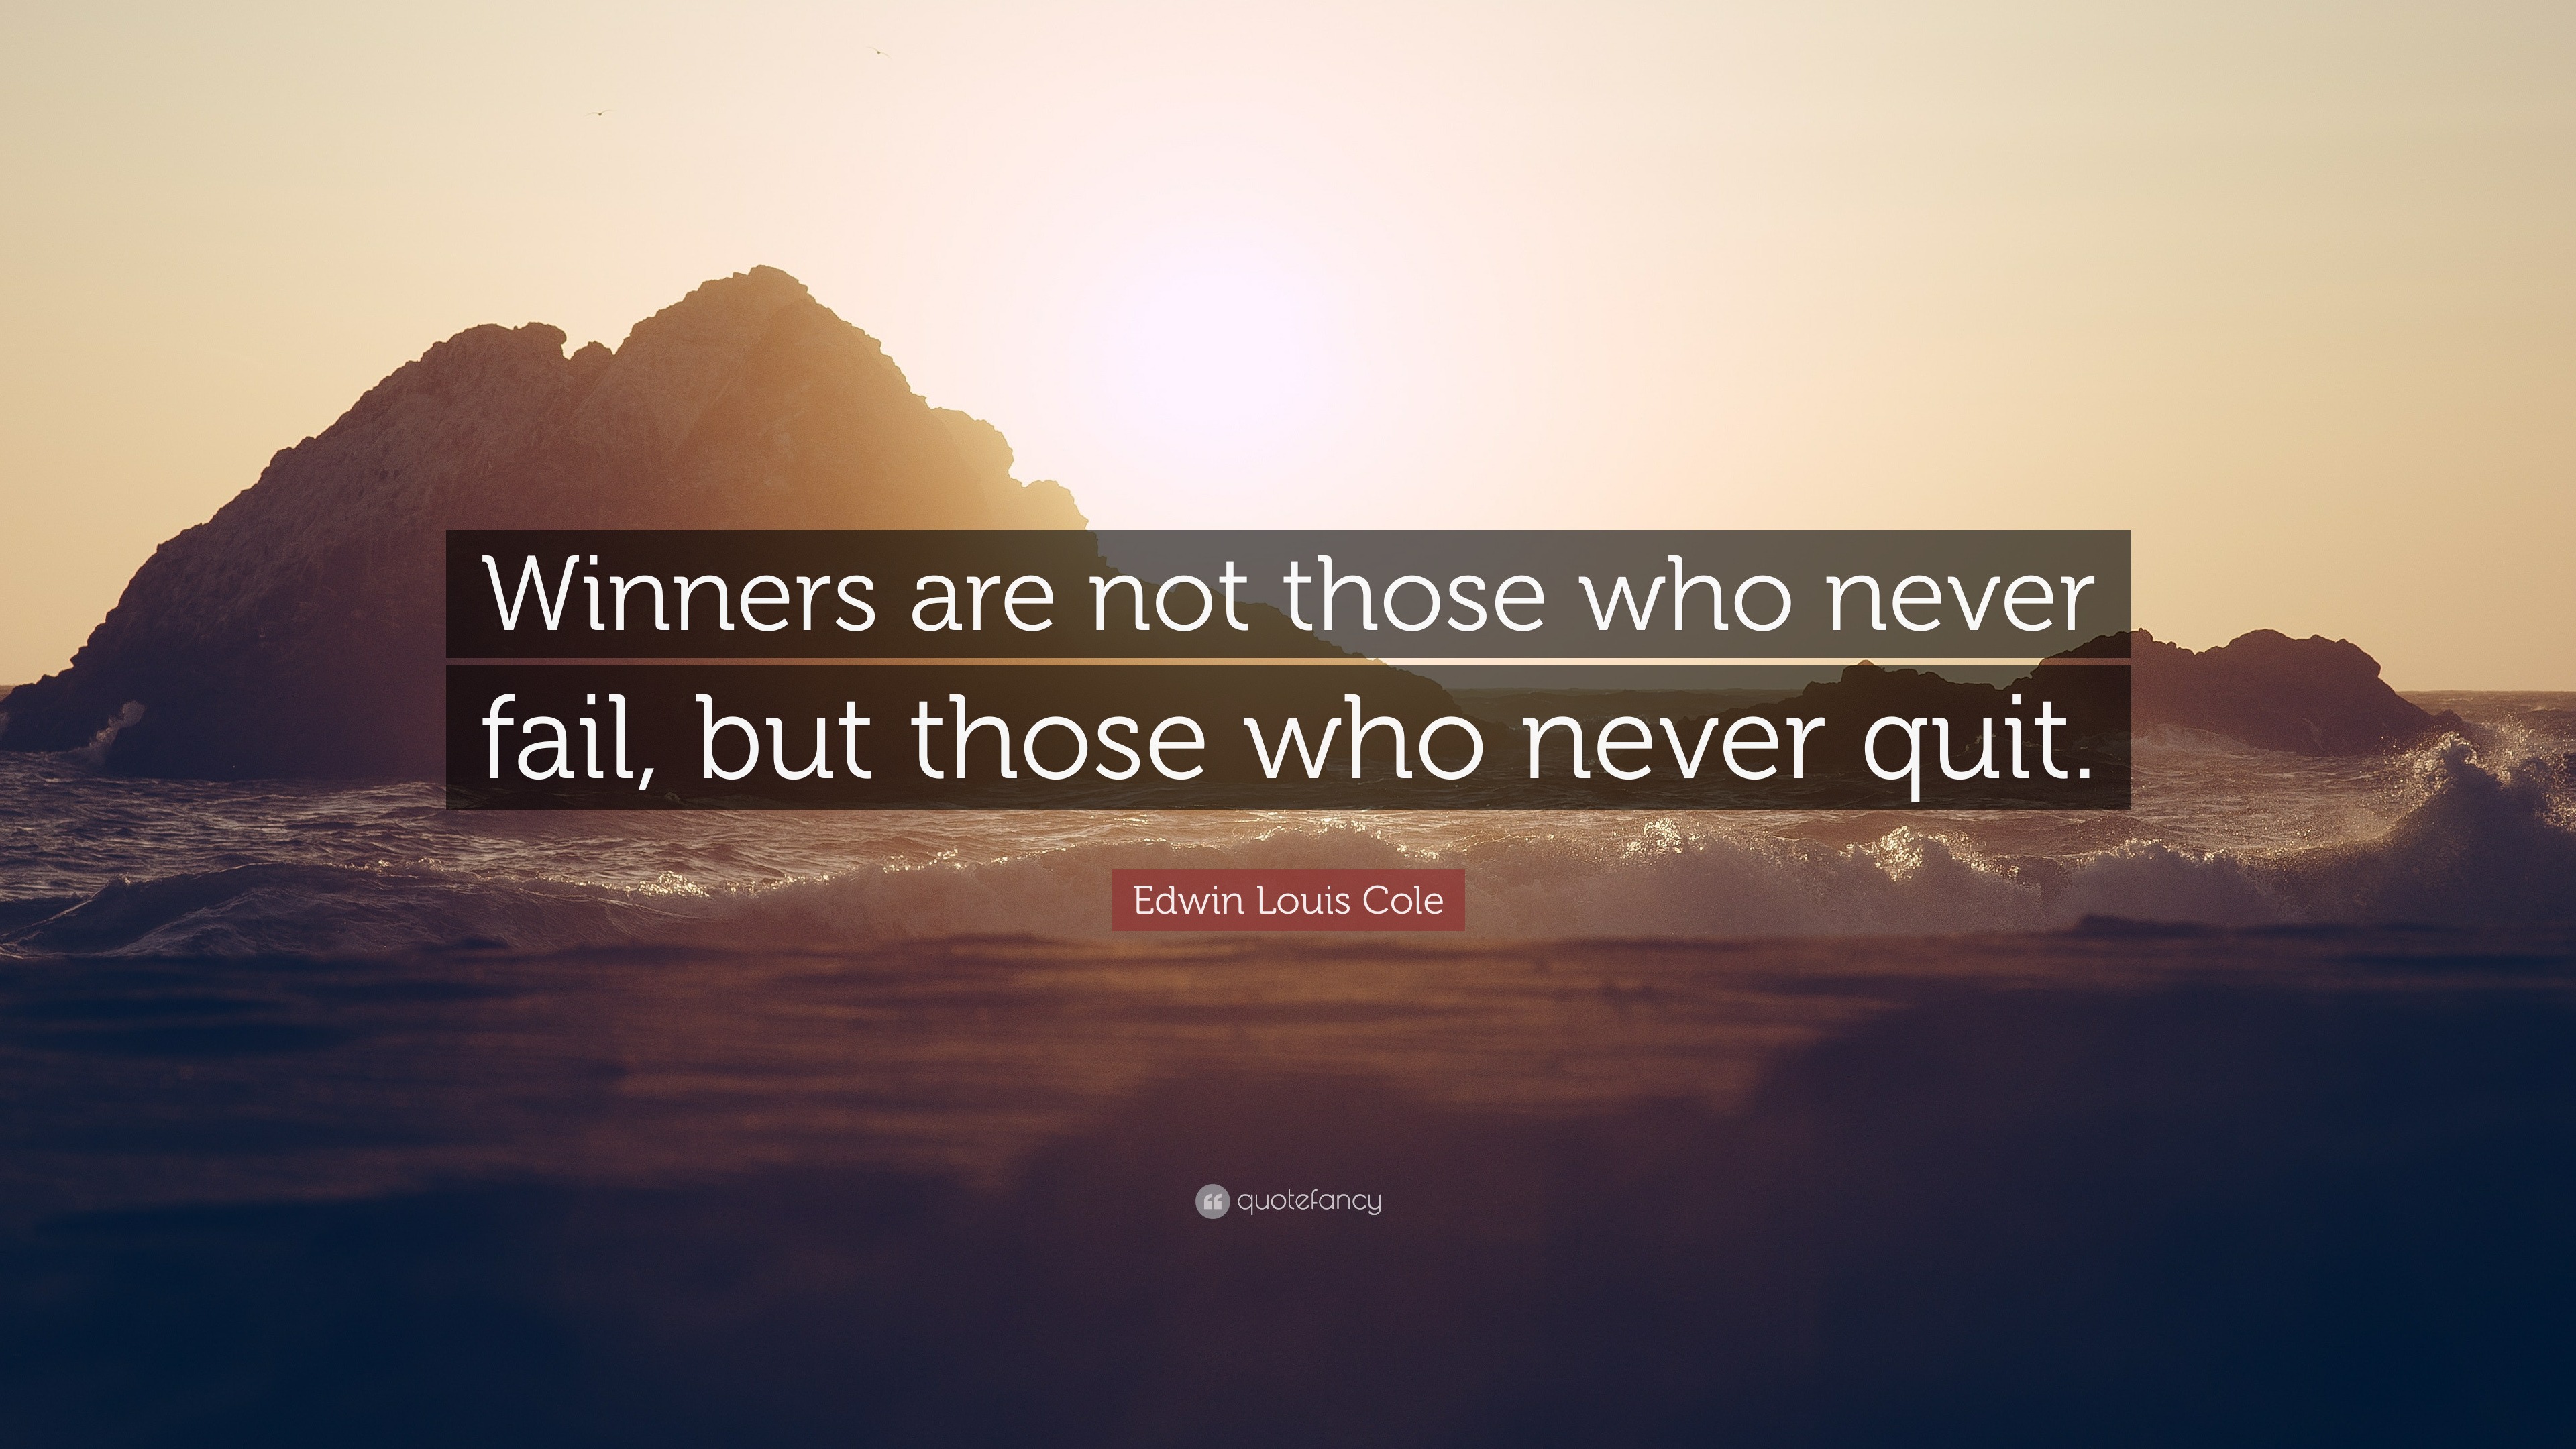 Never Quit until You Win by Louis West